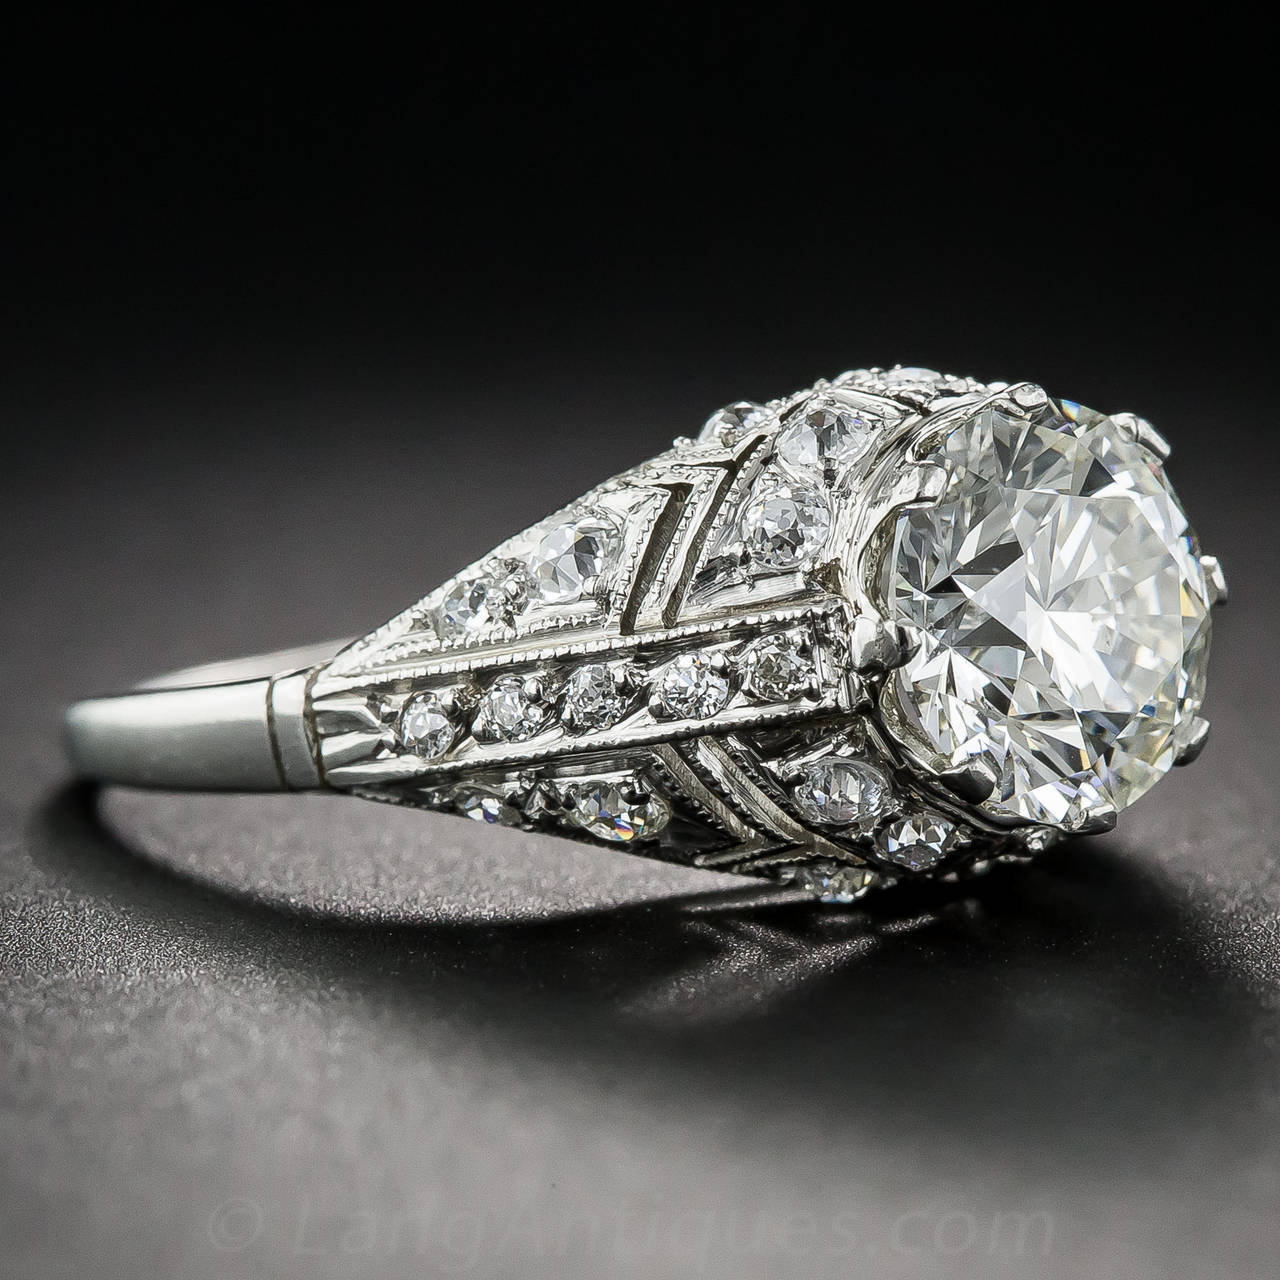 2.08 Carat Diamond Art Deco Style Ring In Excellent Condition For Sale In San Francisco, CA